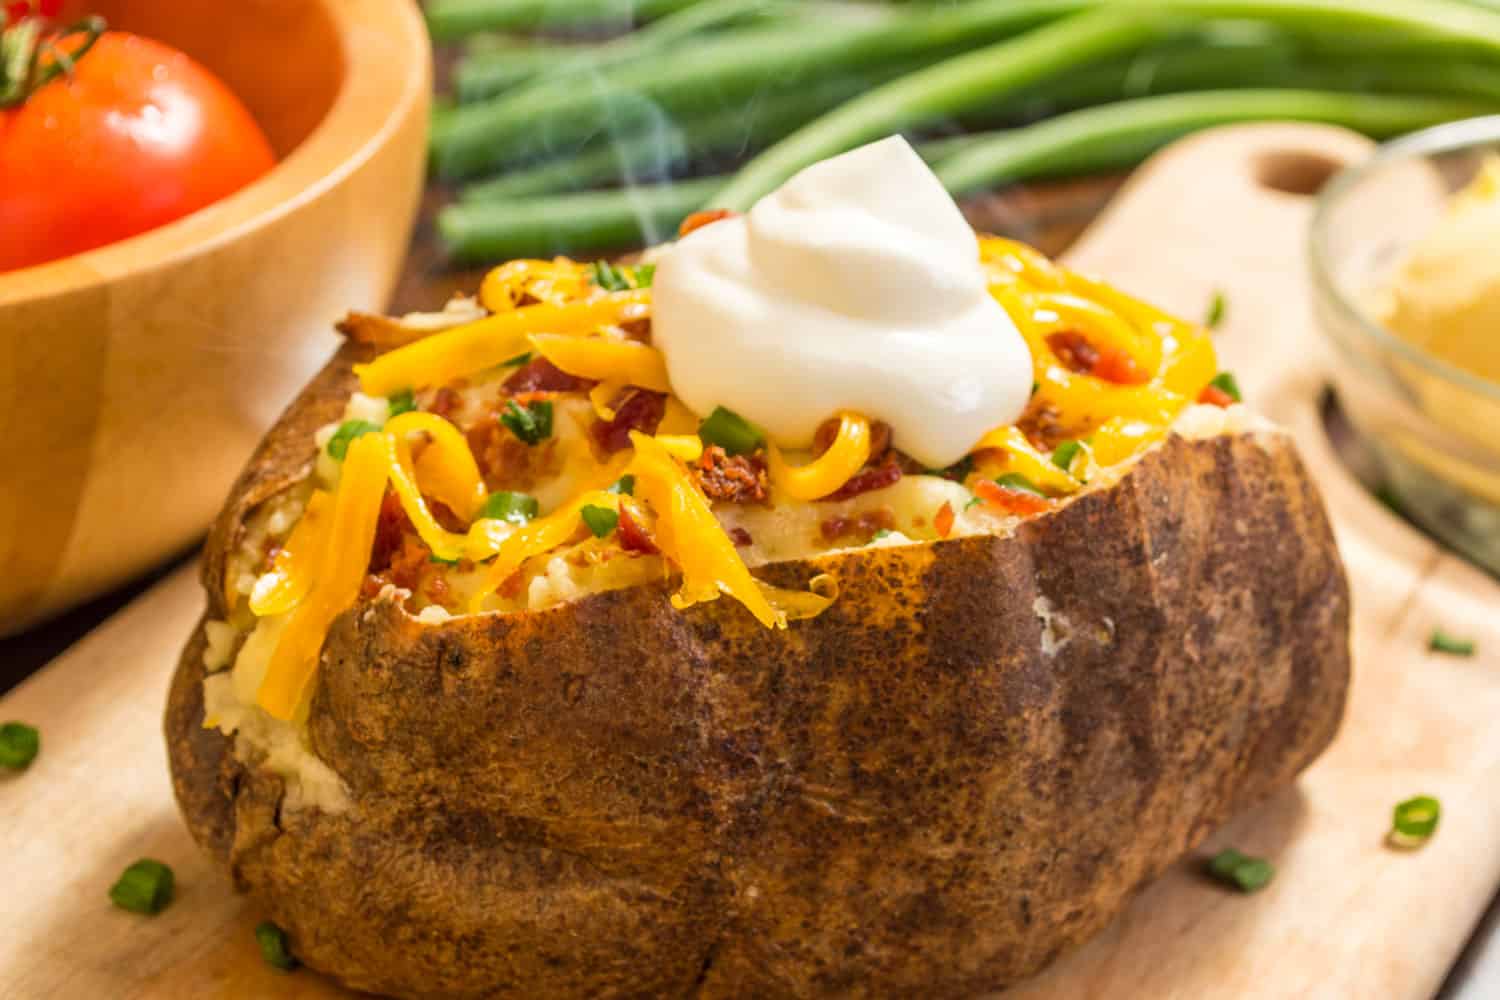 Fresh hot and smoking baked potatoes with bacon cheese and chives